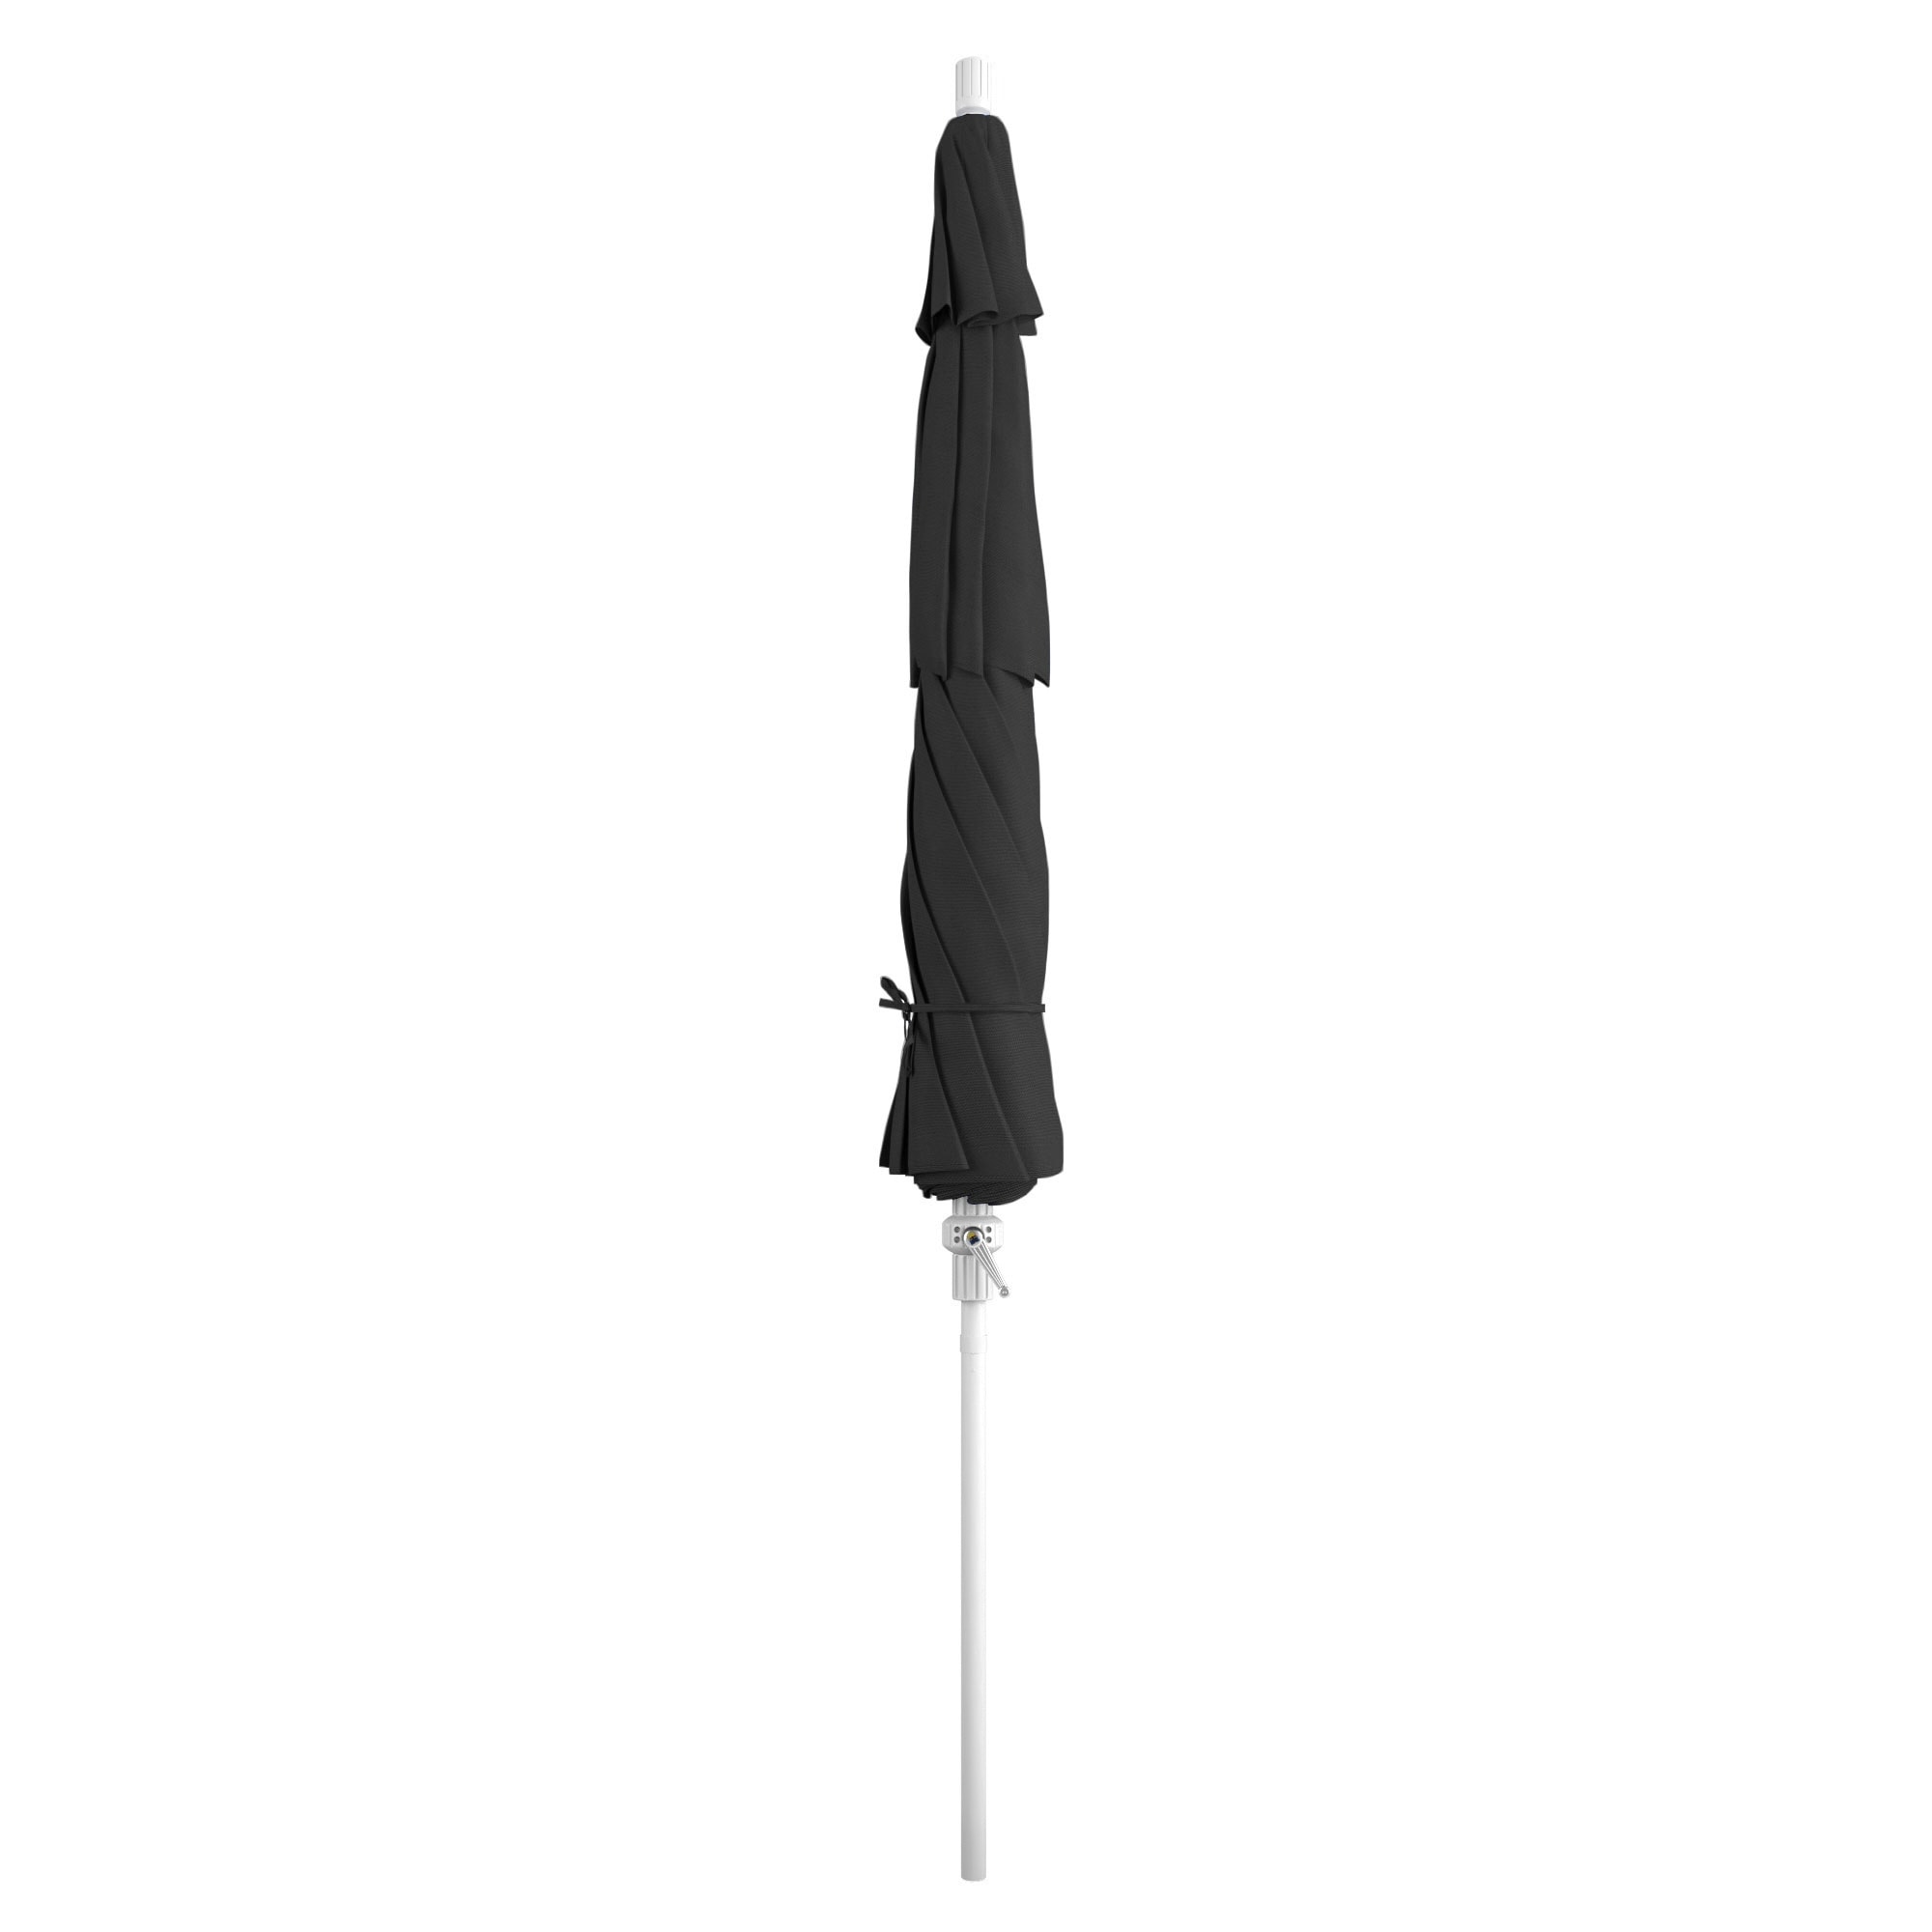 Havenside Home Perry 11ft Crank Lift Aluminum Round Umbrella by , Base Not Included Black - image 4 of 5